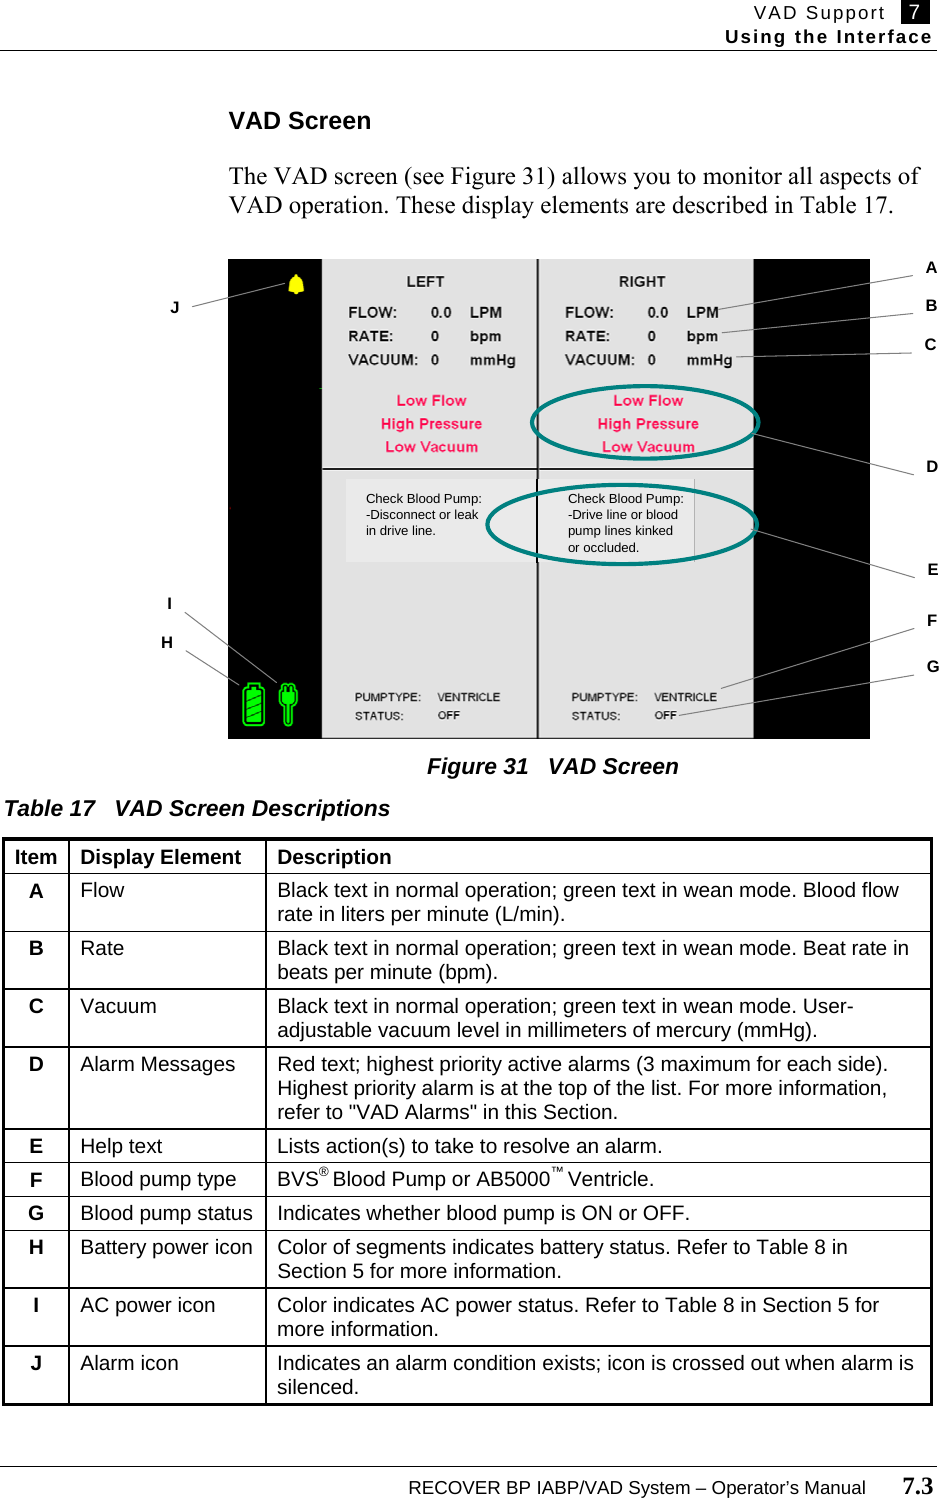 VAD Support   7   Using the Interface  RECOVER BP IABP/VAD System – Operator’s Manual       7.3  VAD Screen  The VAD screen (see Figure 31) allows you to monitor all aspects of VAD operation. These display elements are described in Table 17.                           Figure 31   VAD Screen  Table 17   VAD Screen Descriptions  Item Display Element  Description A  Flow  Black text in normal operation; green text in wean mode. Blood flow rate in liters per minute (L/min). B  Rate  Black text in normal operation; green text in wean mode. Beat rate in beats per minute (bpm). C  Vacuum  Black text in normal operation; green text in wean mode. User-adjustable vacuum level in millimeters of mercury (mmHg). D  Alarm Messages  Red text; highest priority active alarms (3 maximum for each side). Highest priority alarm is at the top of the list. For more information, refer to &quot;VAD Alarms&quot; in this Section. E  Help text  Lists action(s) to take to resolve an alarm. F  Blood pump type  BVS® Blood Pump or AB5000™ Ventricle. G  Blood pump status  Indicates whether blood pump is ON or OFF. H  Battery power icon  Color of segments indicates battery status. Refer to Table 8 in Section 5 for more information. I  AC power icon  Color indicates AC power status. Refer to Table 8 in Section 5 for more information. J  Alarm icon  Indicates an alarm condition exists; icon is crossed out when alarm is silenced.   Check Blood Pump:-Disconnect or leakin drive line.Check Blood Pump:-Drive line or bloodpump lines kinkedor occluded. HA D E I  F G B C  J 